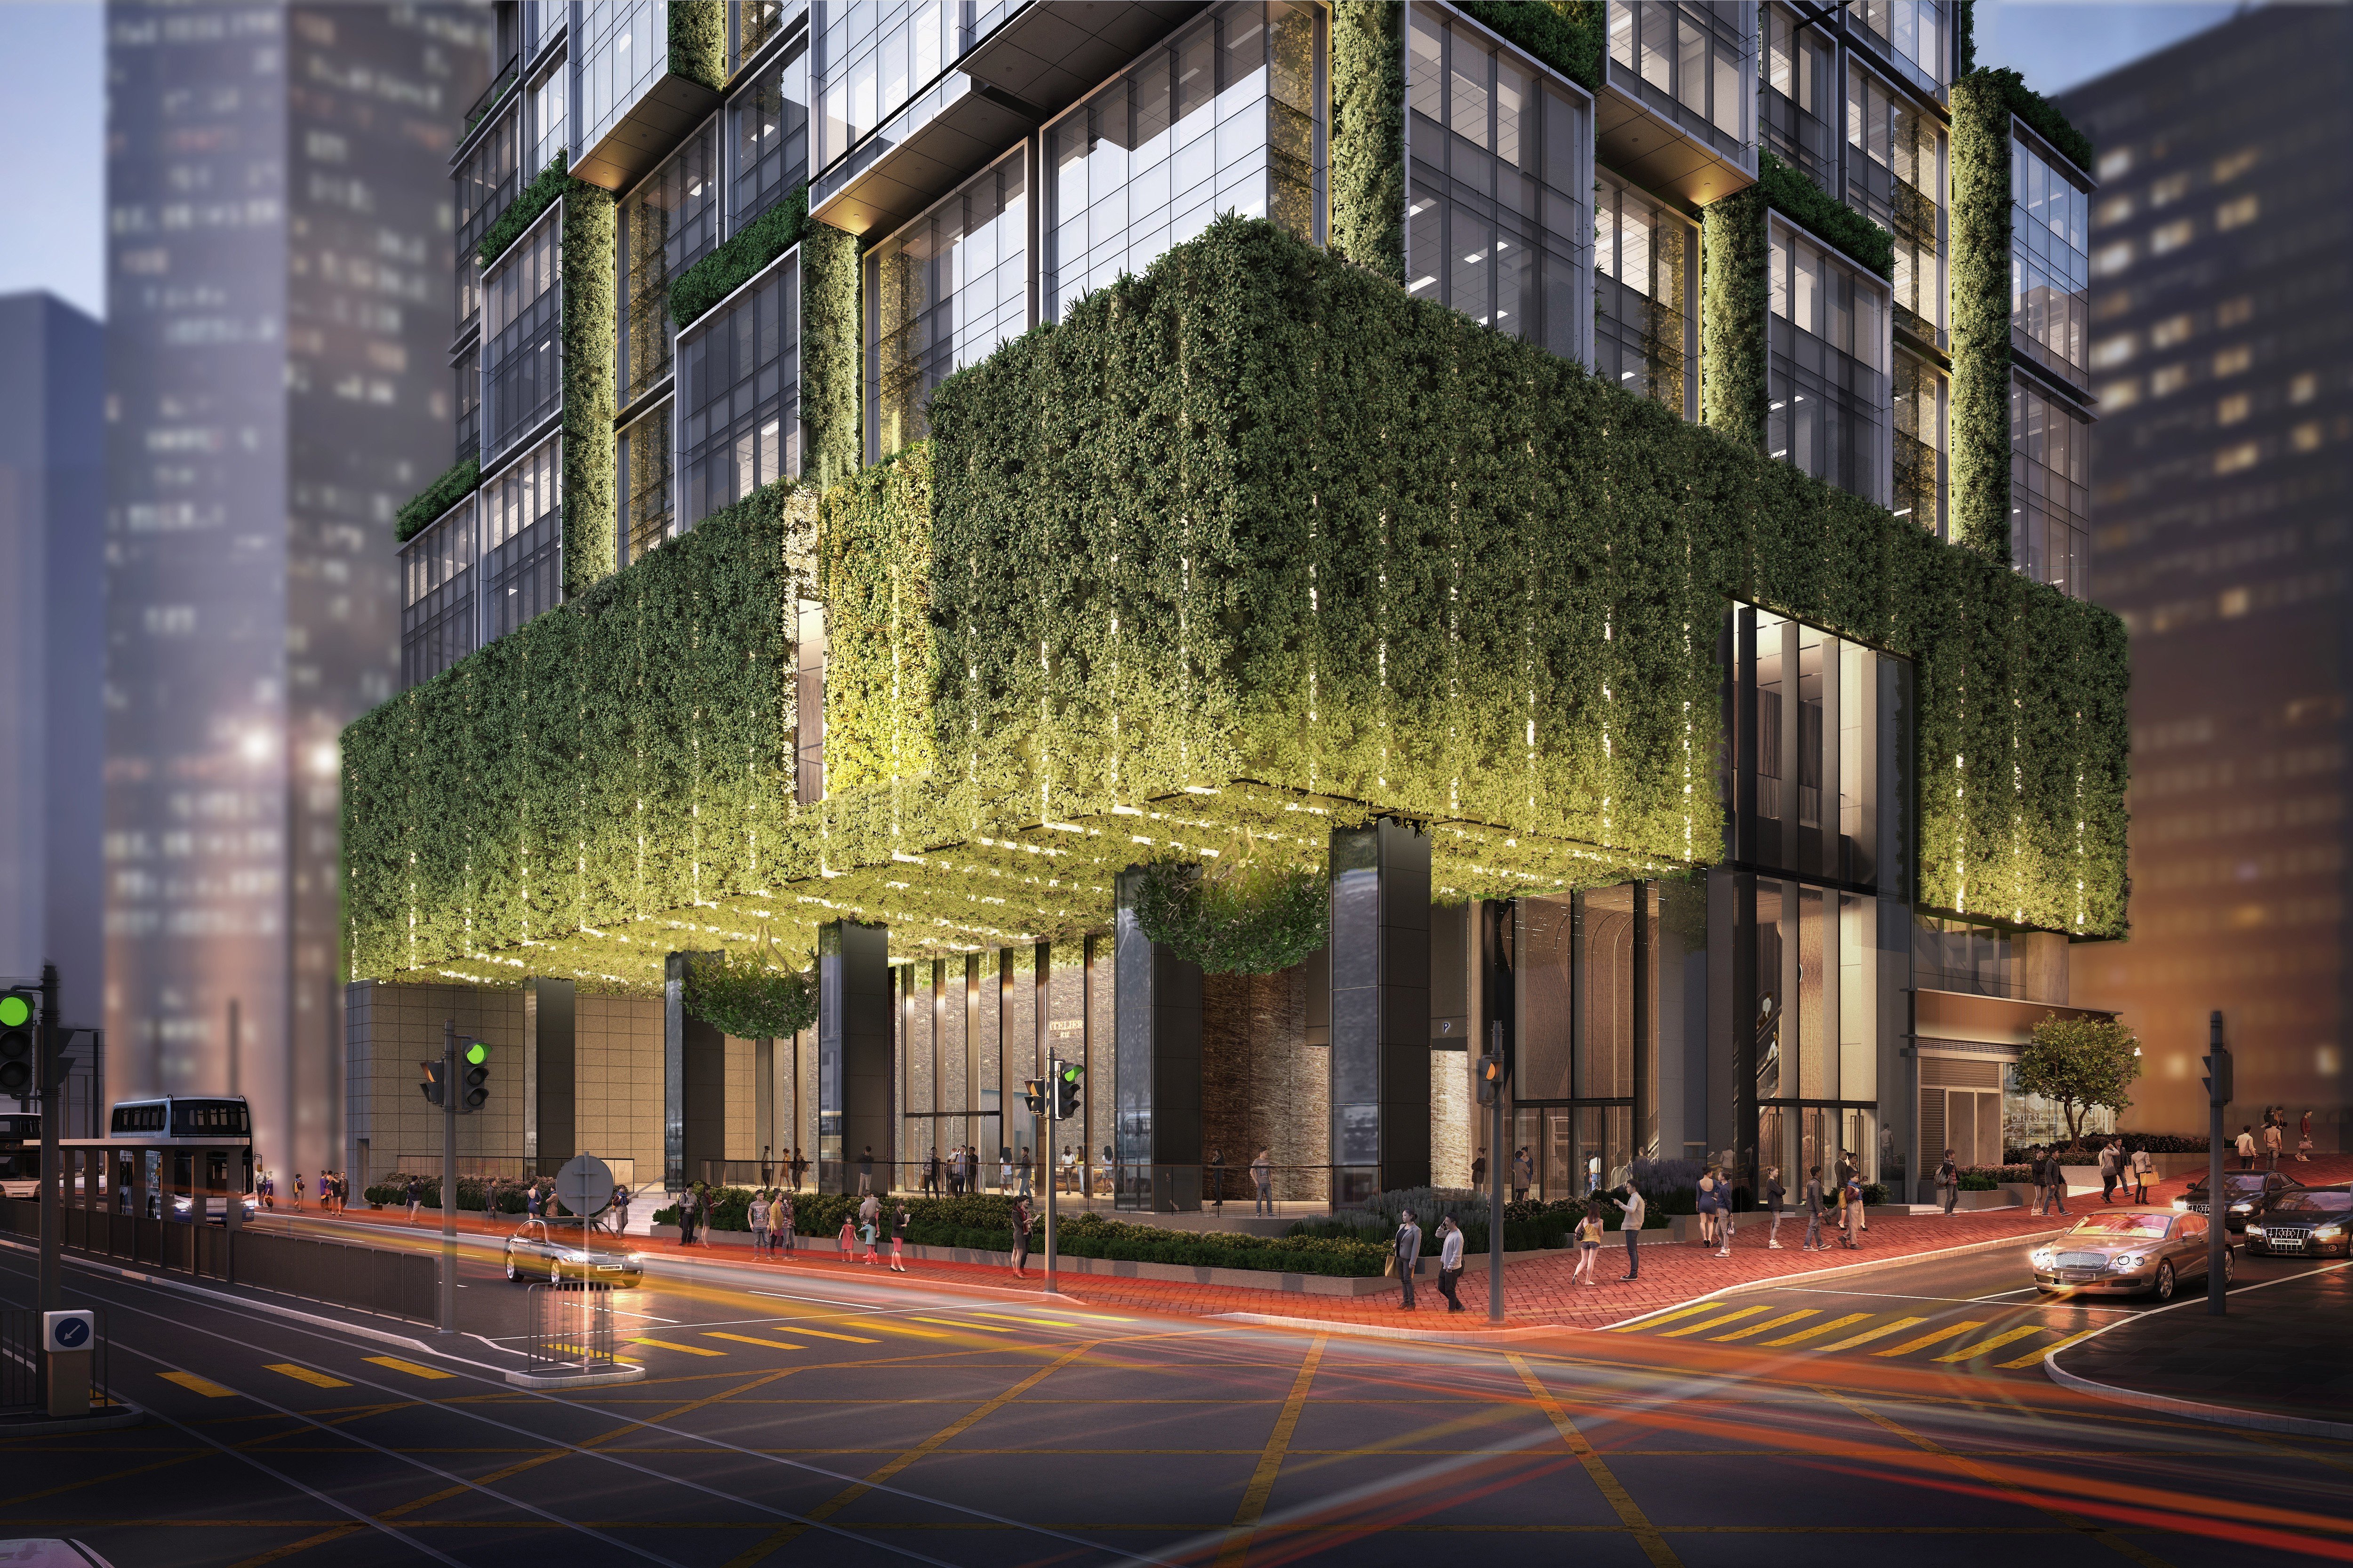 An artist’s impression of the green-walled ceilings and walls of the entrance of Hong Kong’s mixed-use building, K11 Atelier King’s Road in Quarry Bay, which opened in October.